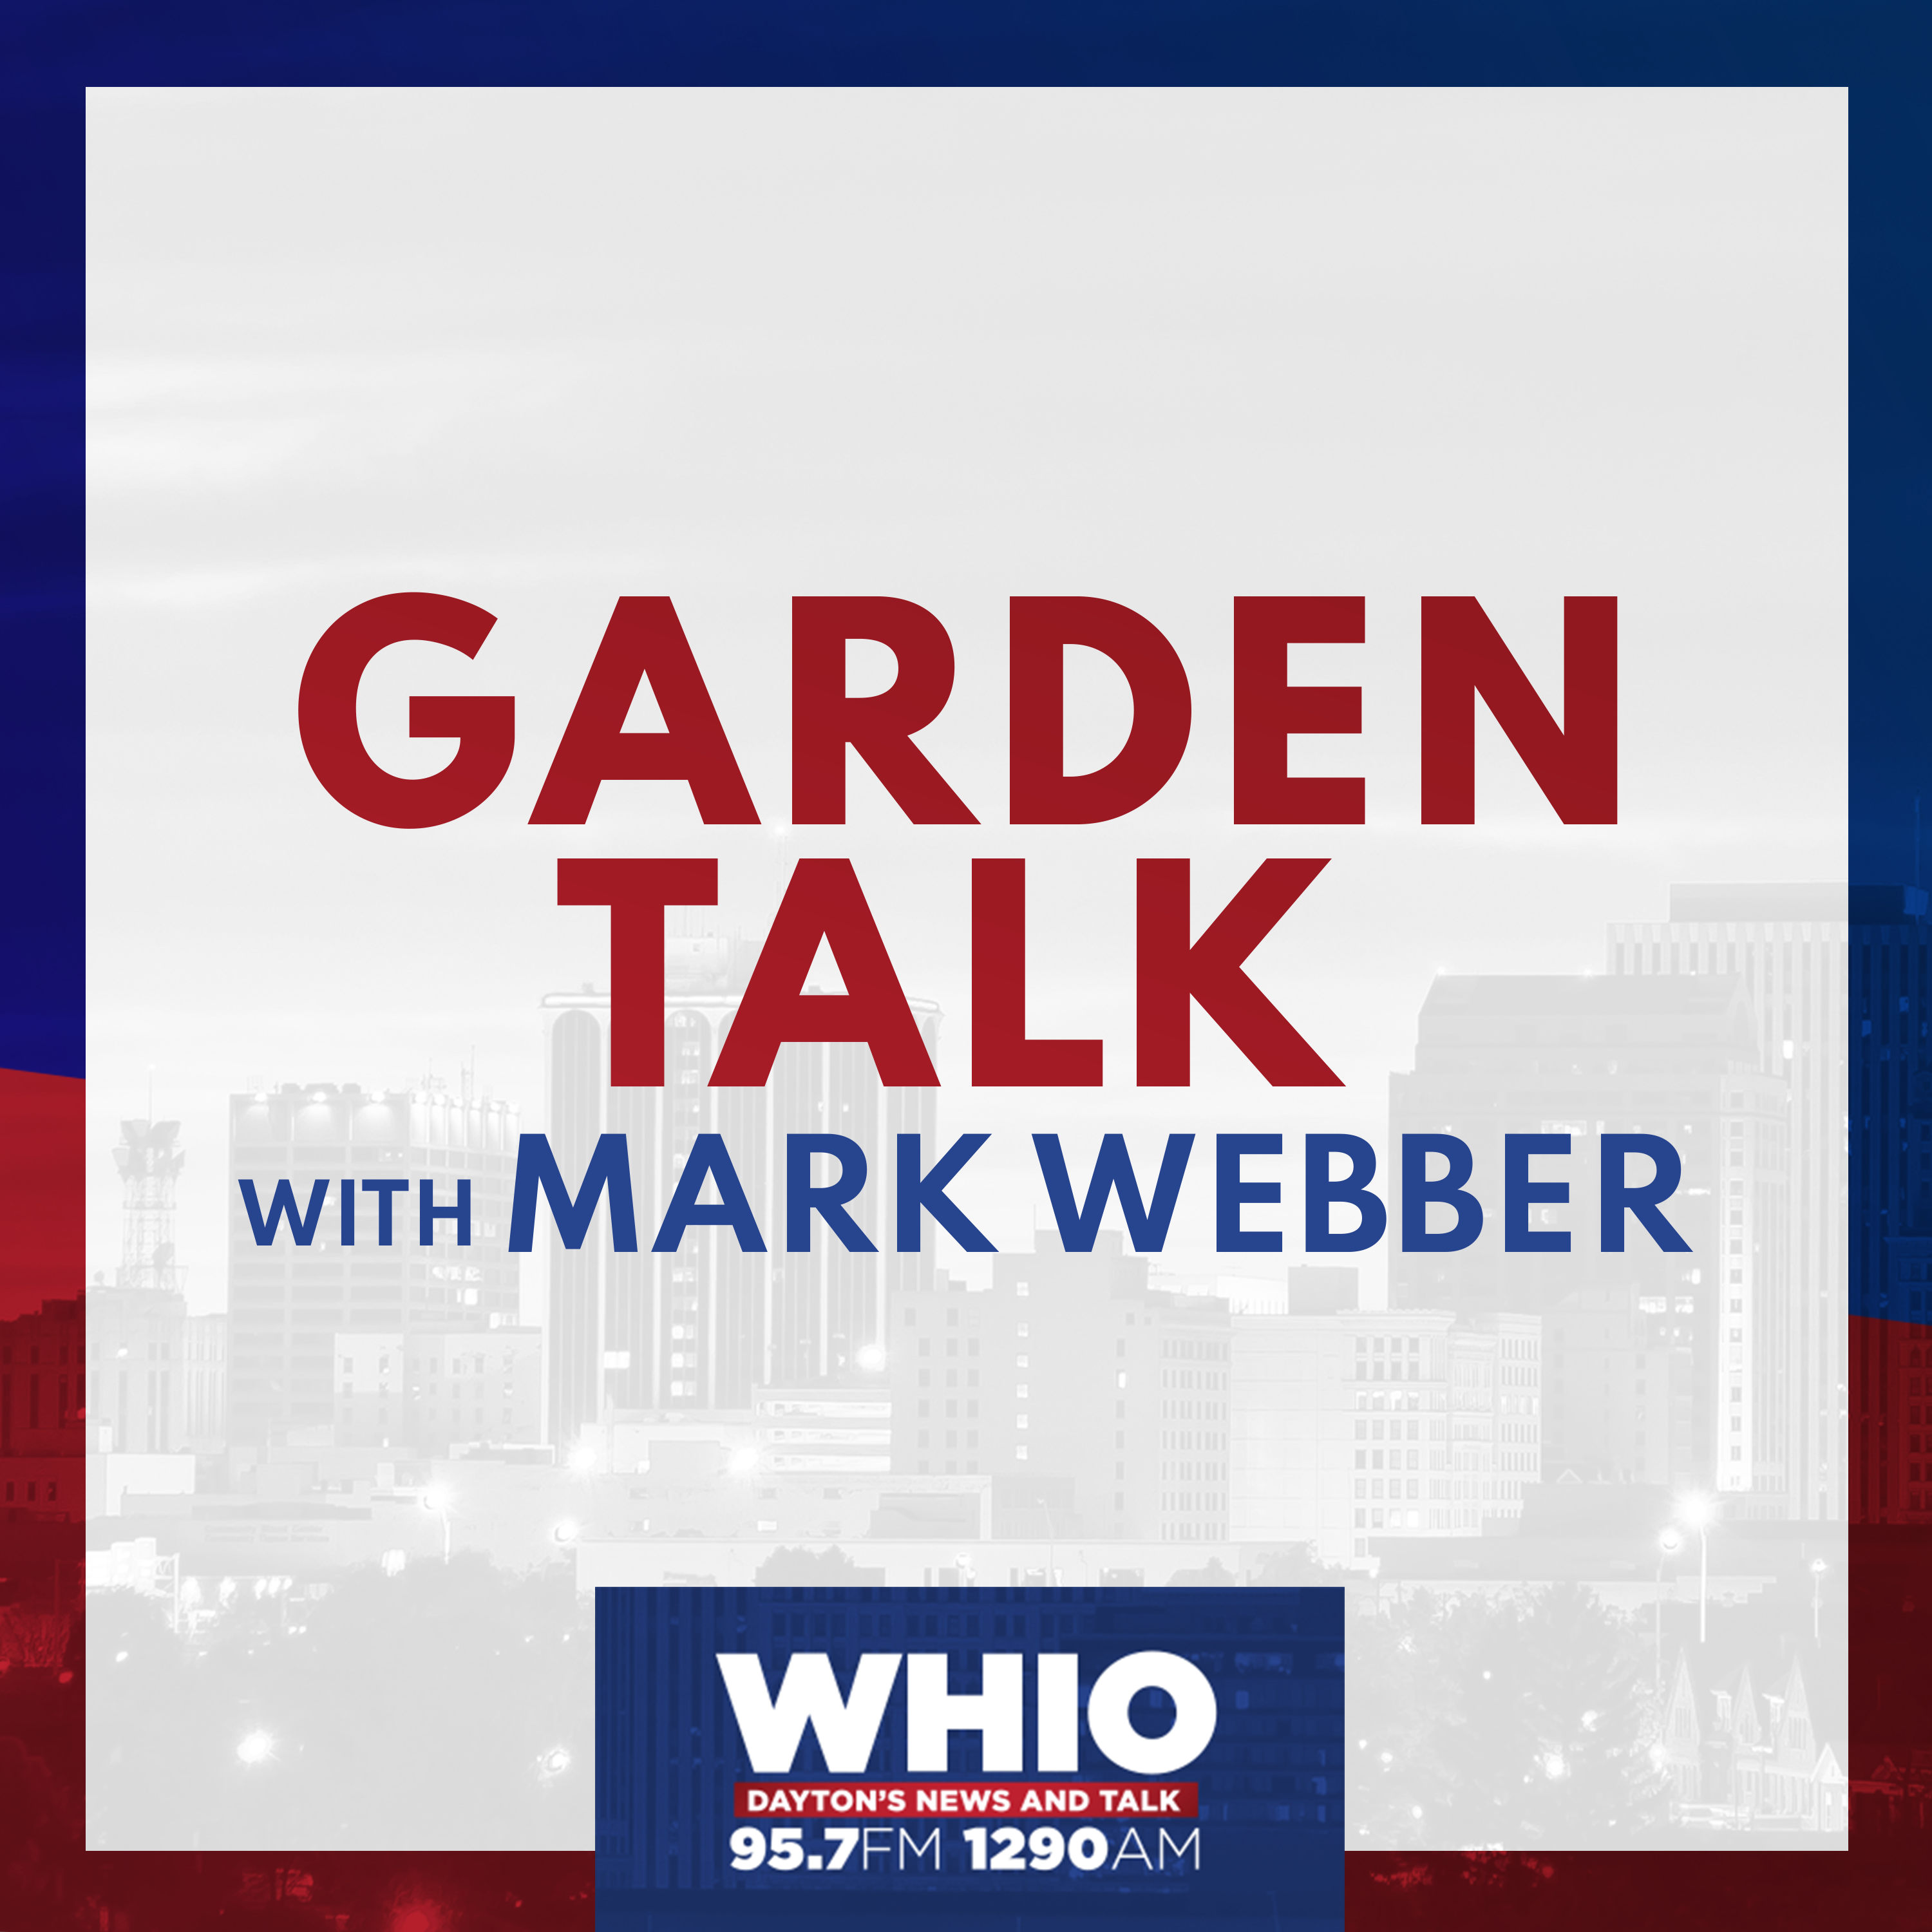 Garden Talk with Mark Webber: Hour 2 from Saturday, March 14th, 2015